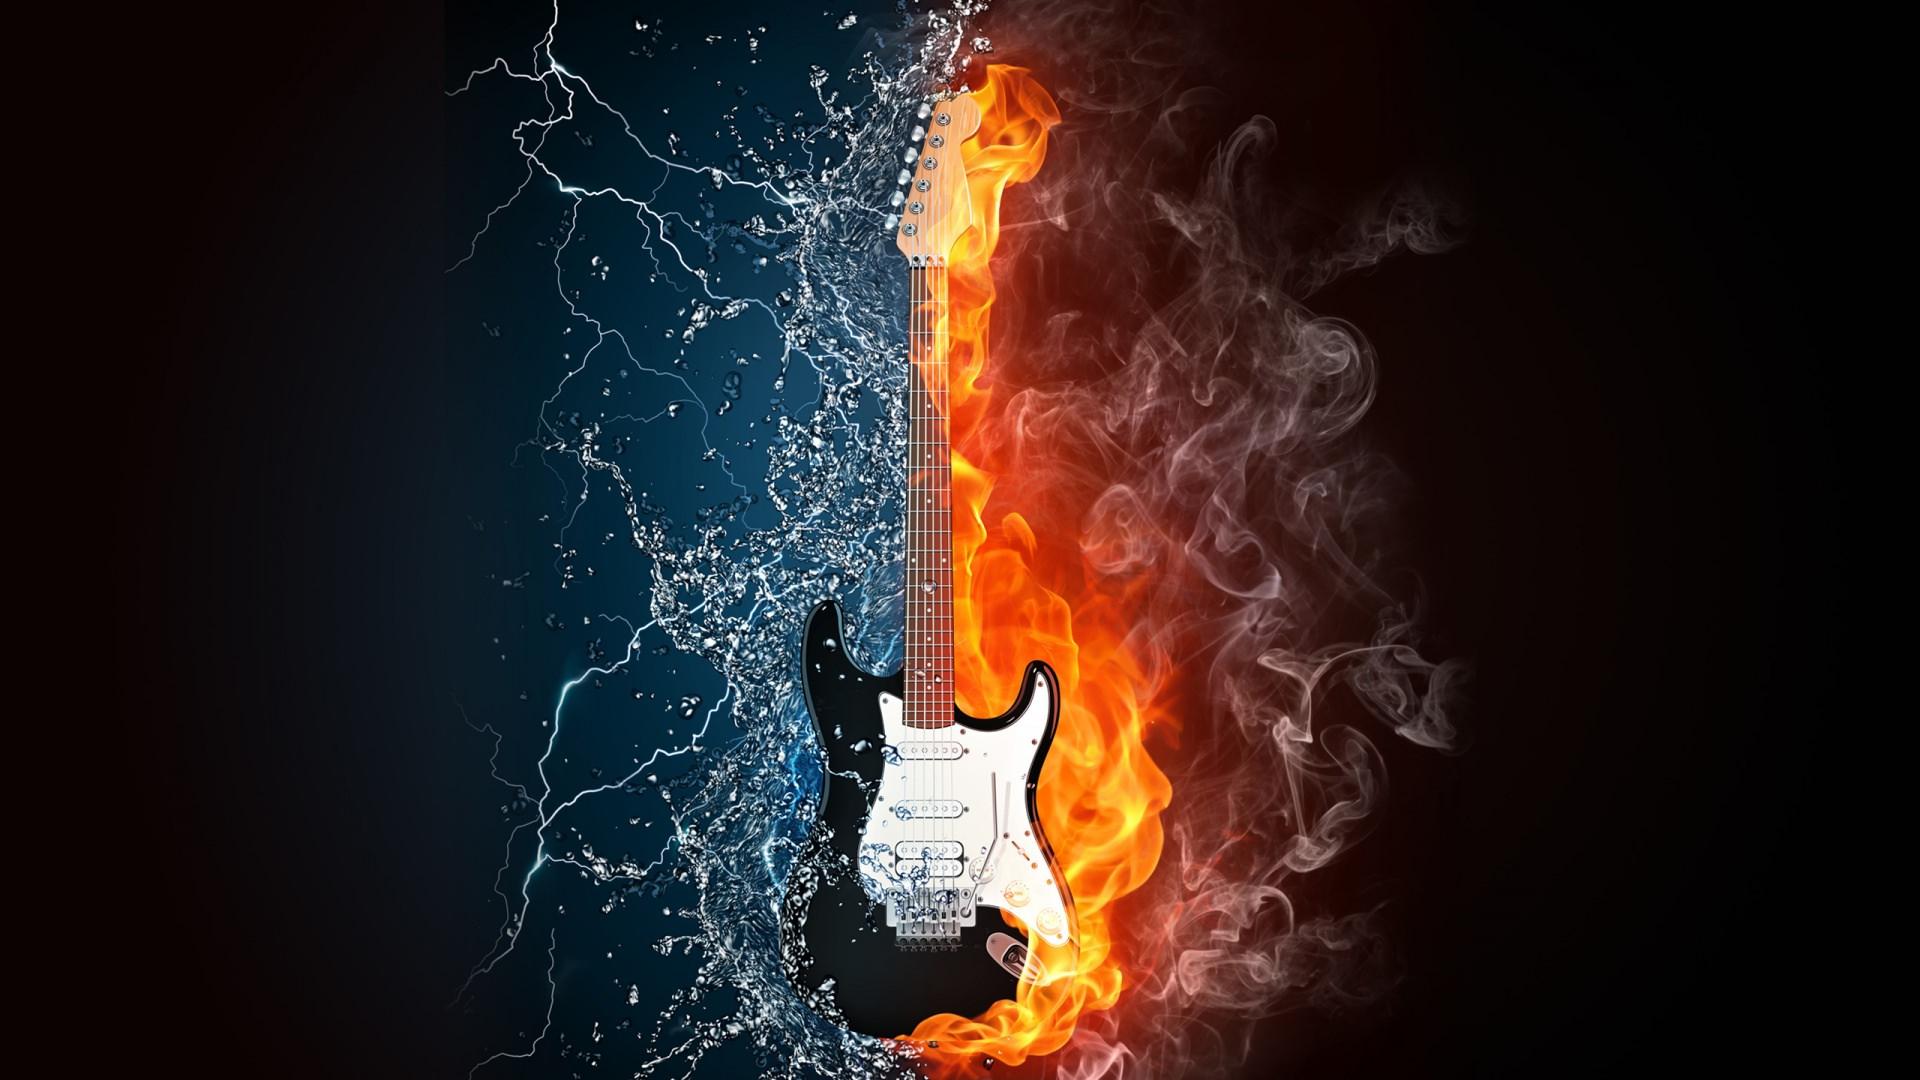 Cool Fire And Water Guitar Image HD Wallpaper. High